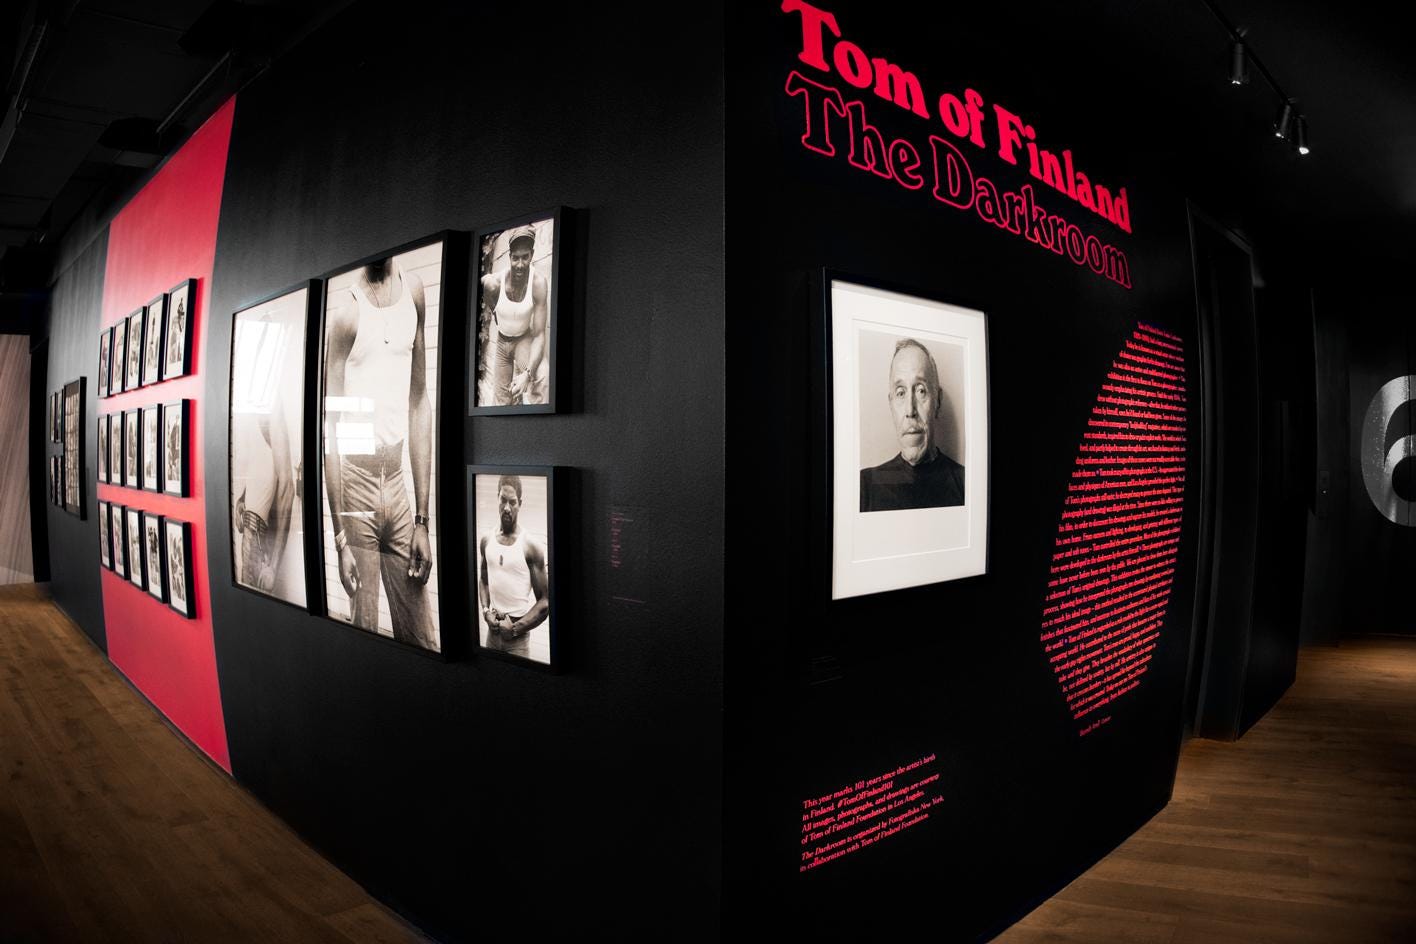 A photo of ‘The Darkroom’ Tom of Finland exhibition at Fotografiska New York in collaboration with the Tom of Finland Foundation 